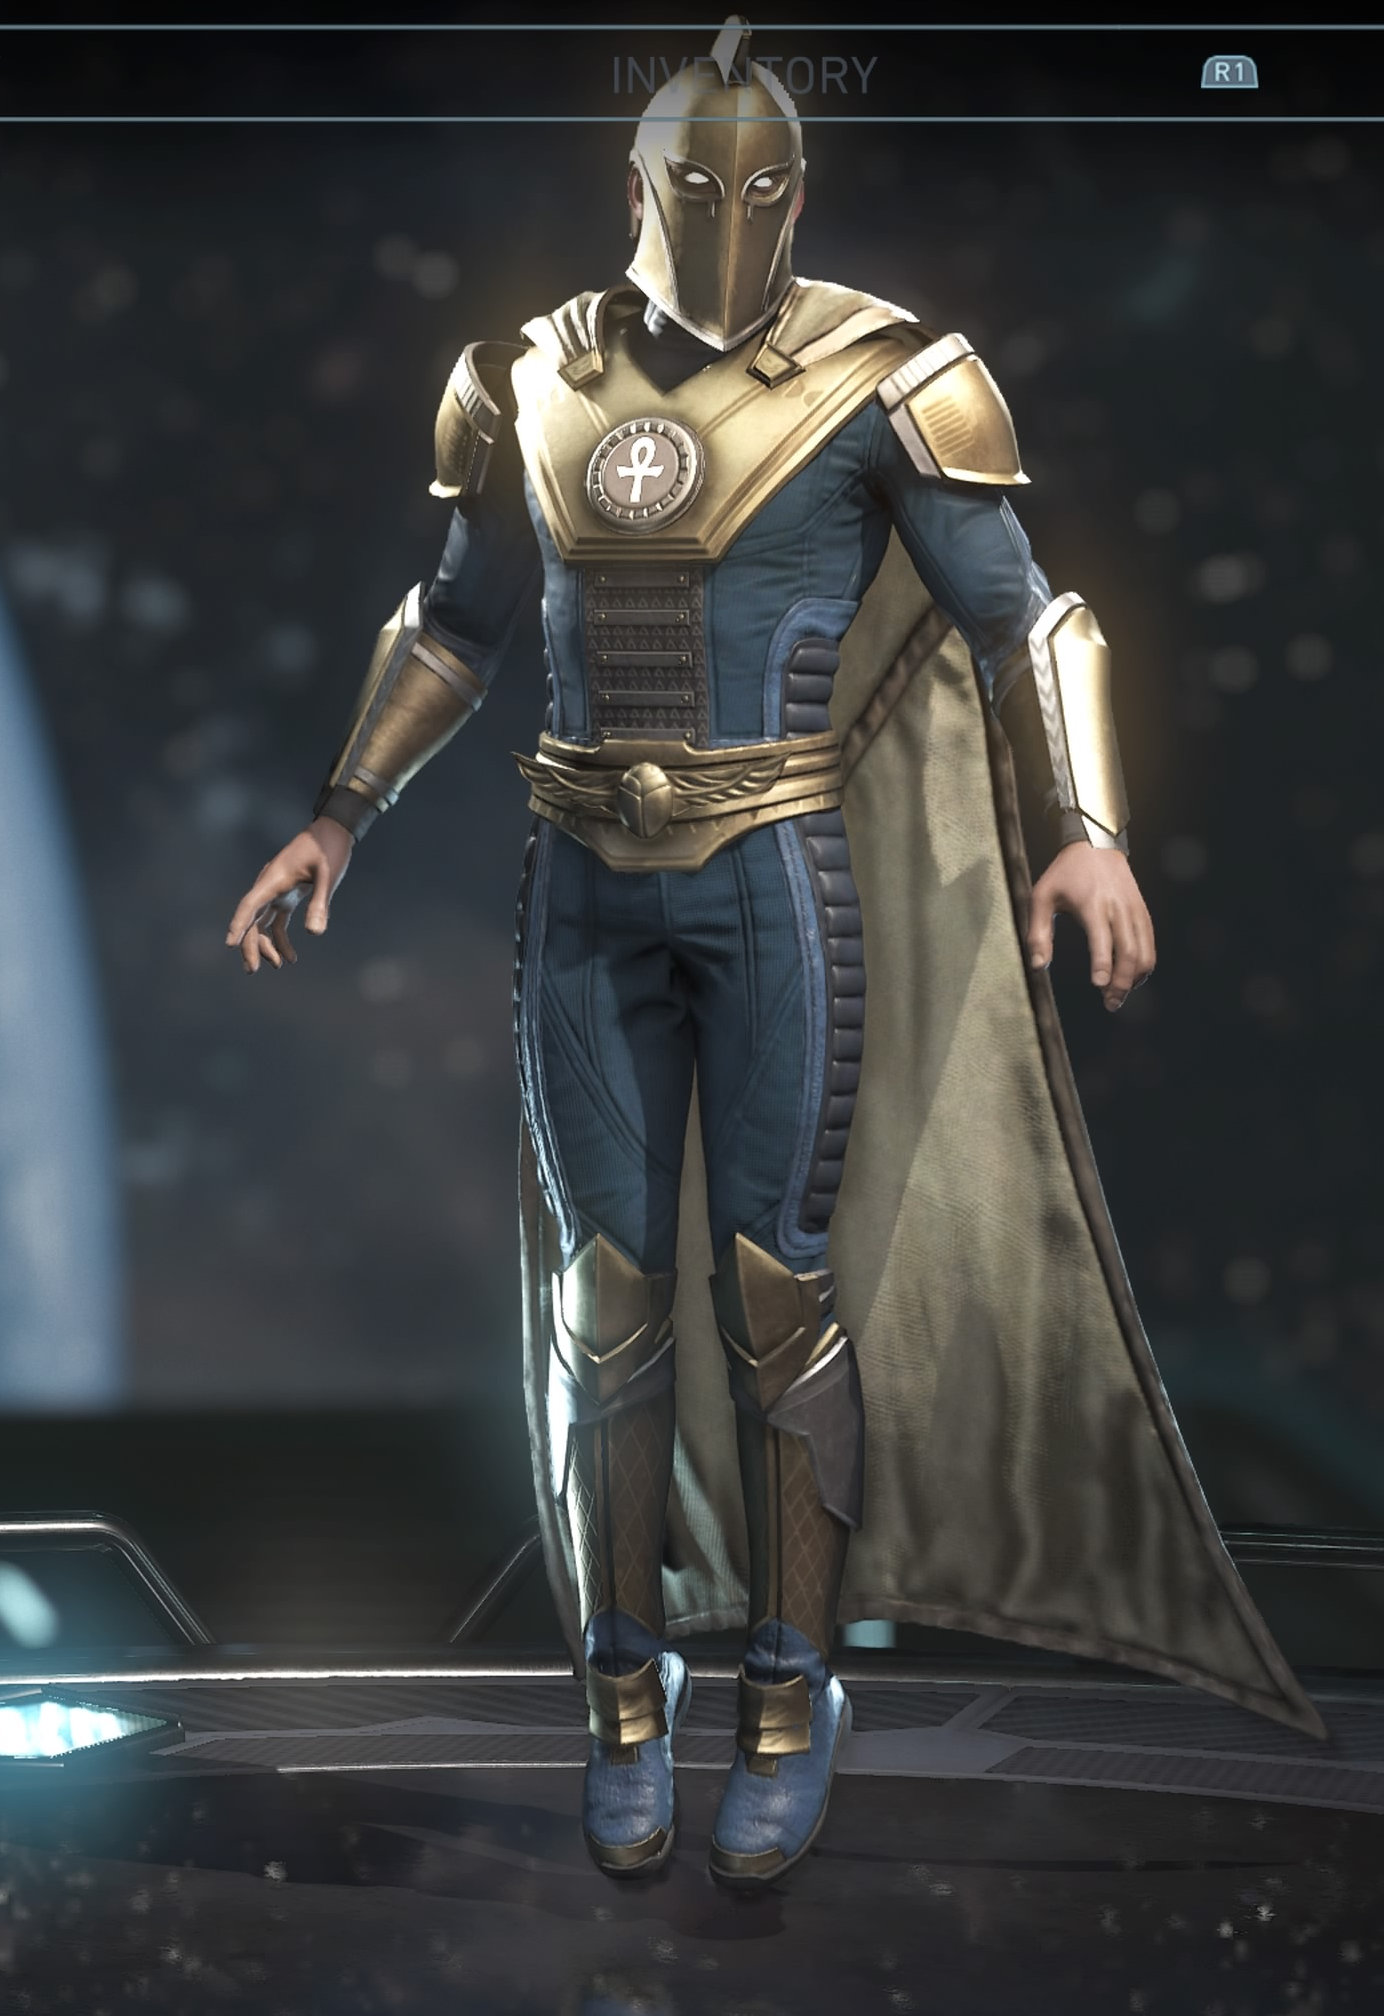 Doctor Fate | Injustice:Gods Among Us Wiki | FANDOM powered by Wikia